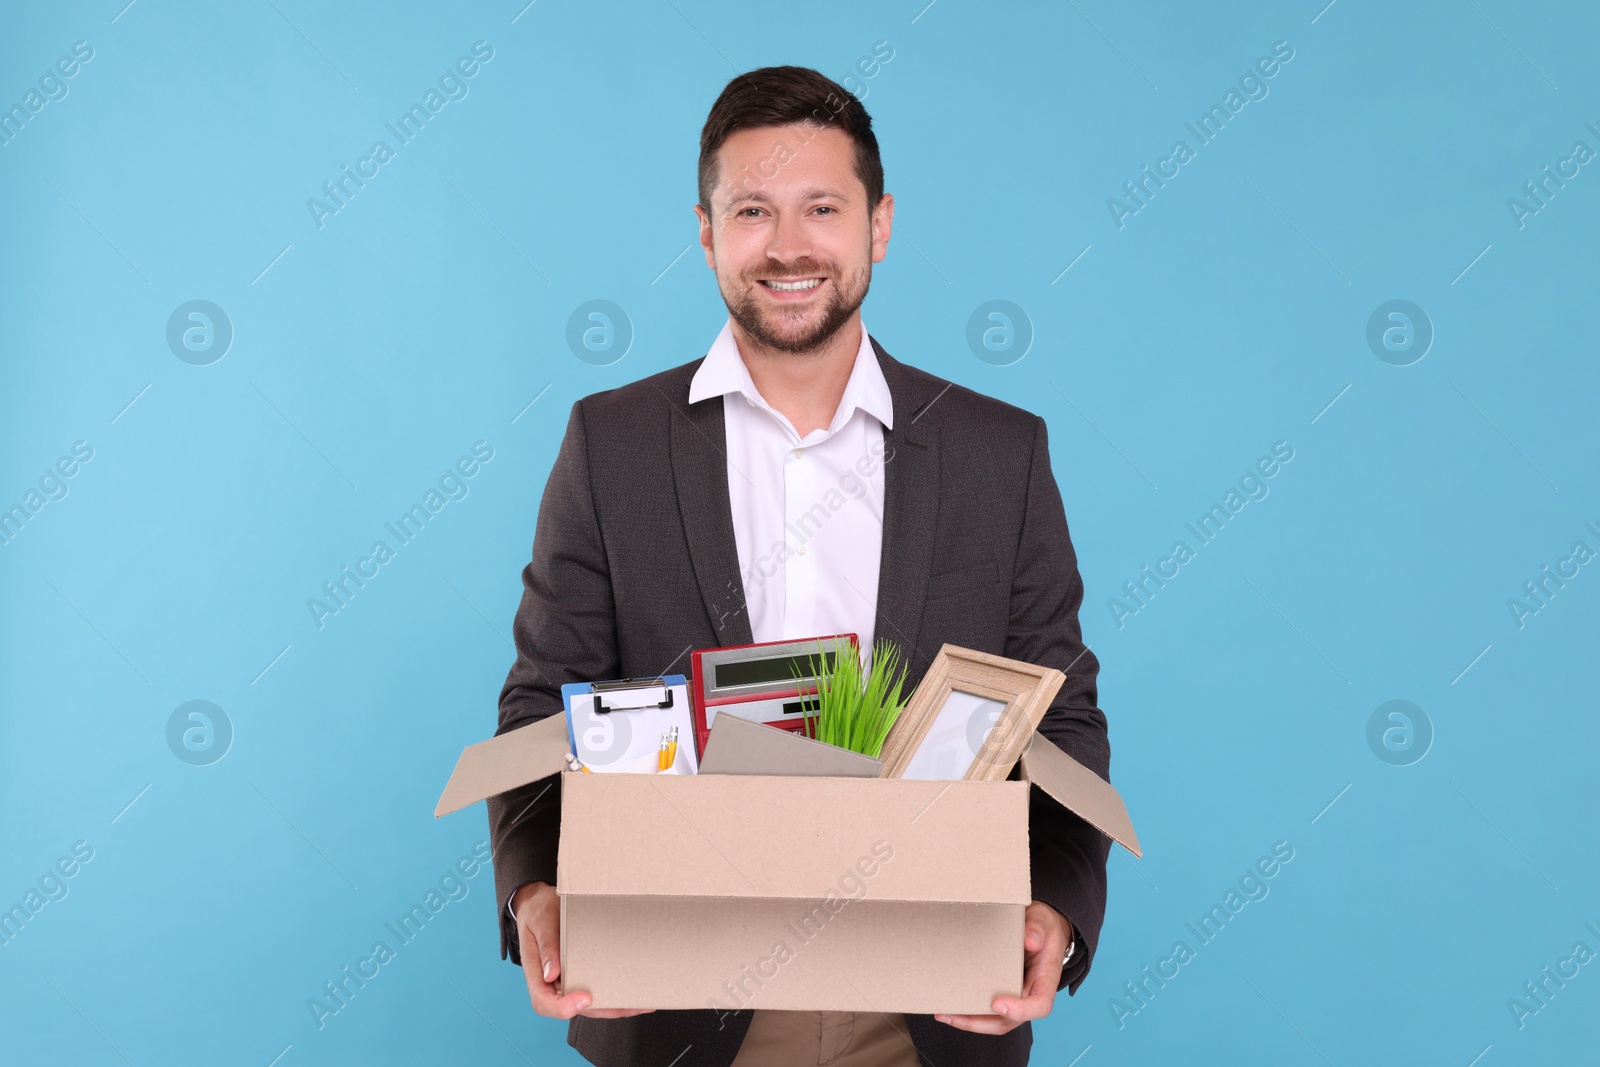 Photo of Happy unemployed man with box of personal office belongings on light blue background